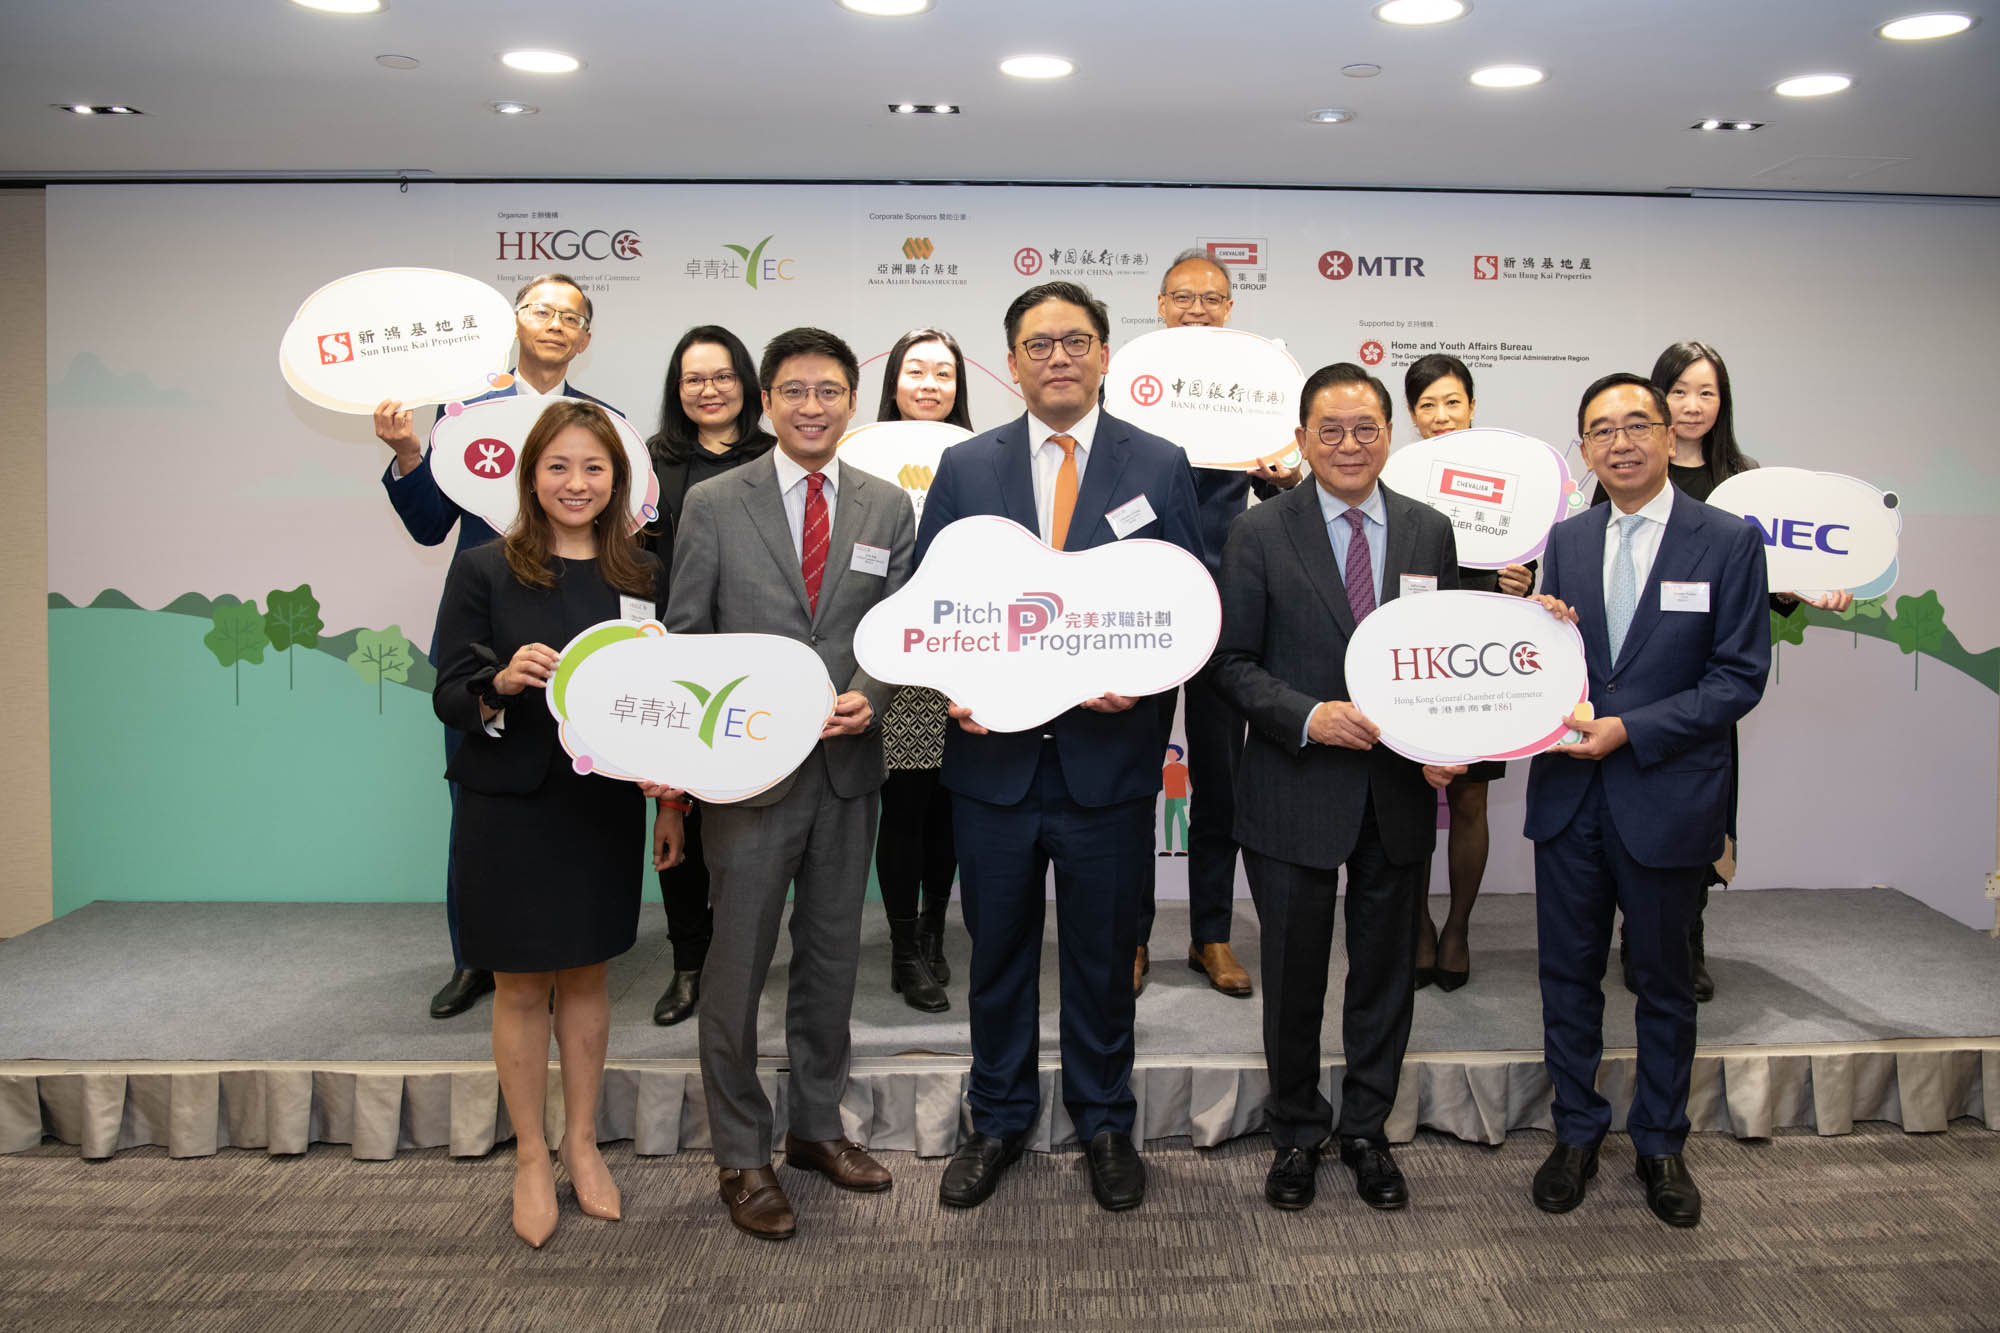 Clarence Leung, Under Secretary for Home and Youth Affairs, organizers and sponsors of 2023 HKGCC Pitch Perfect Programme pose for a group photo.